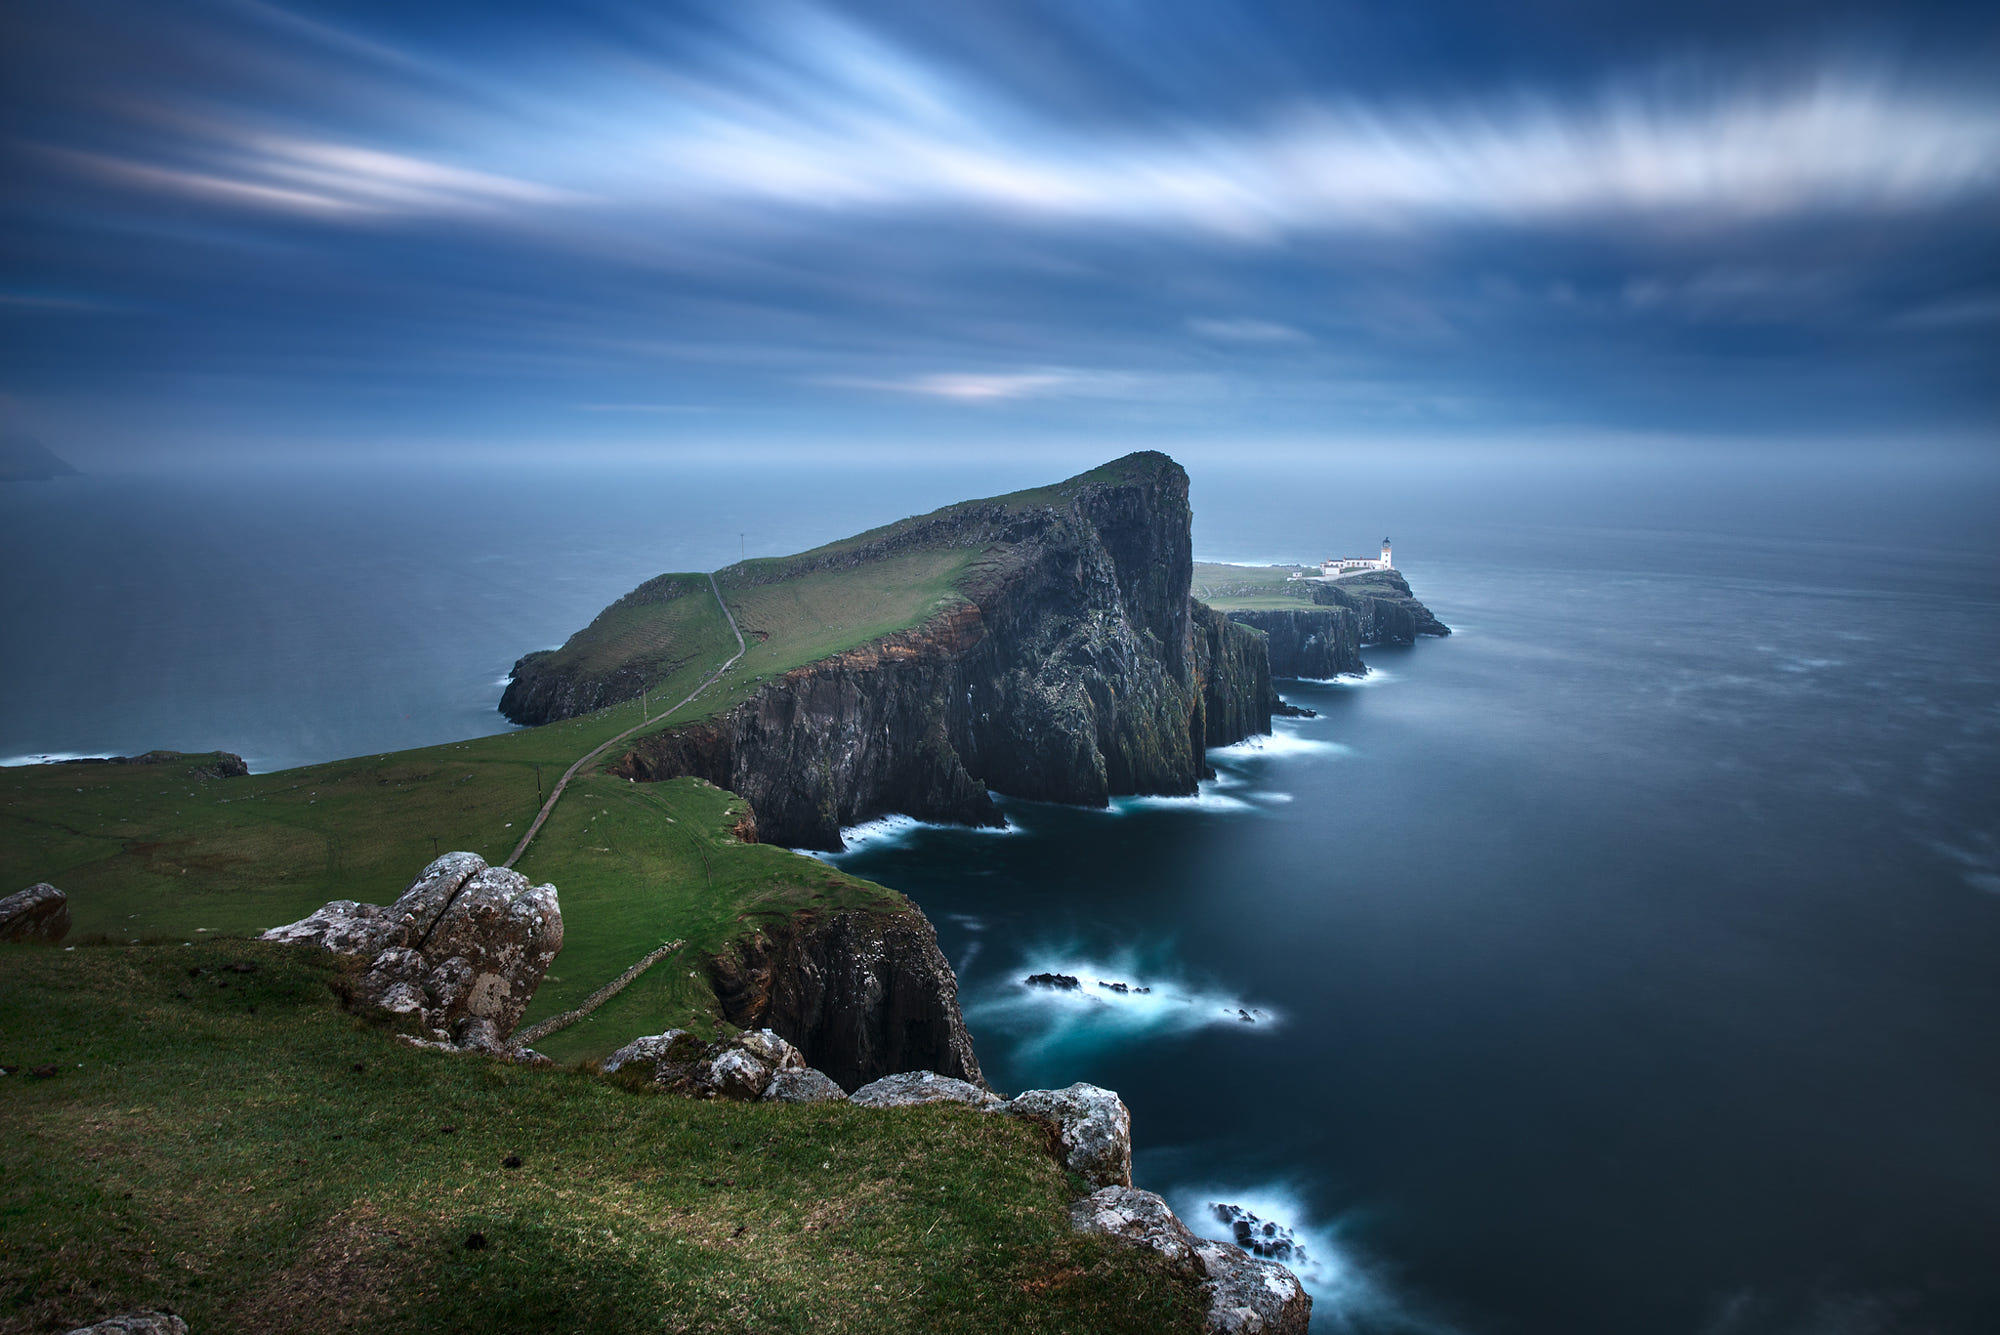 Long Exposure at Neist Point